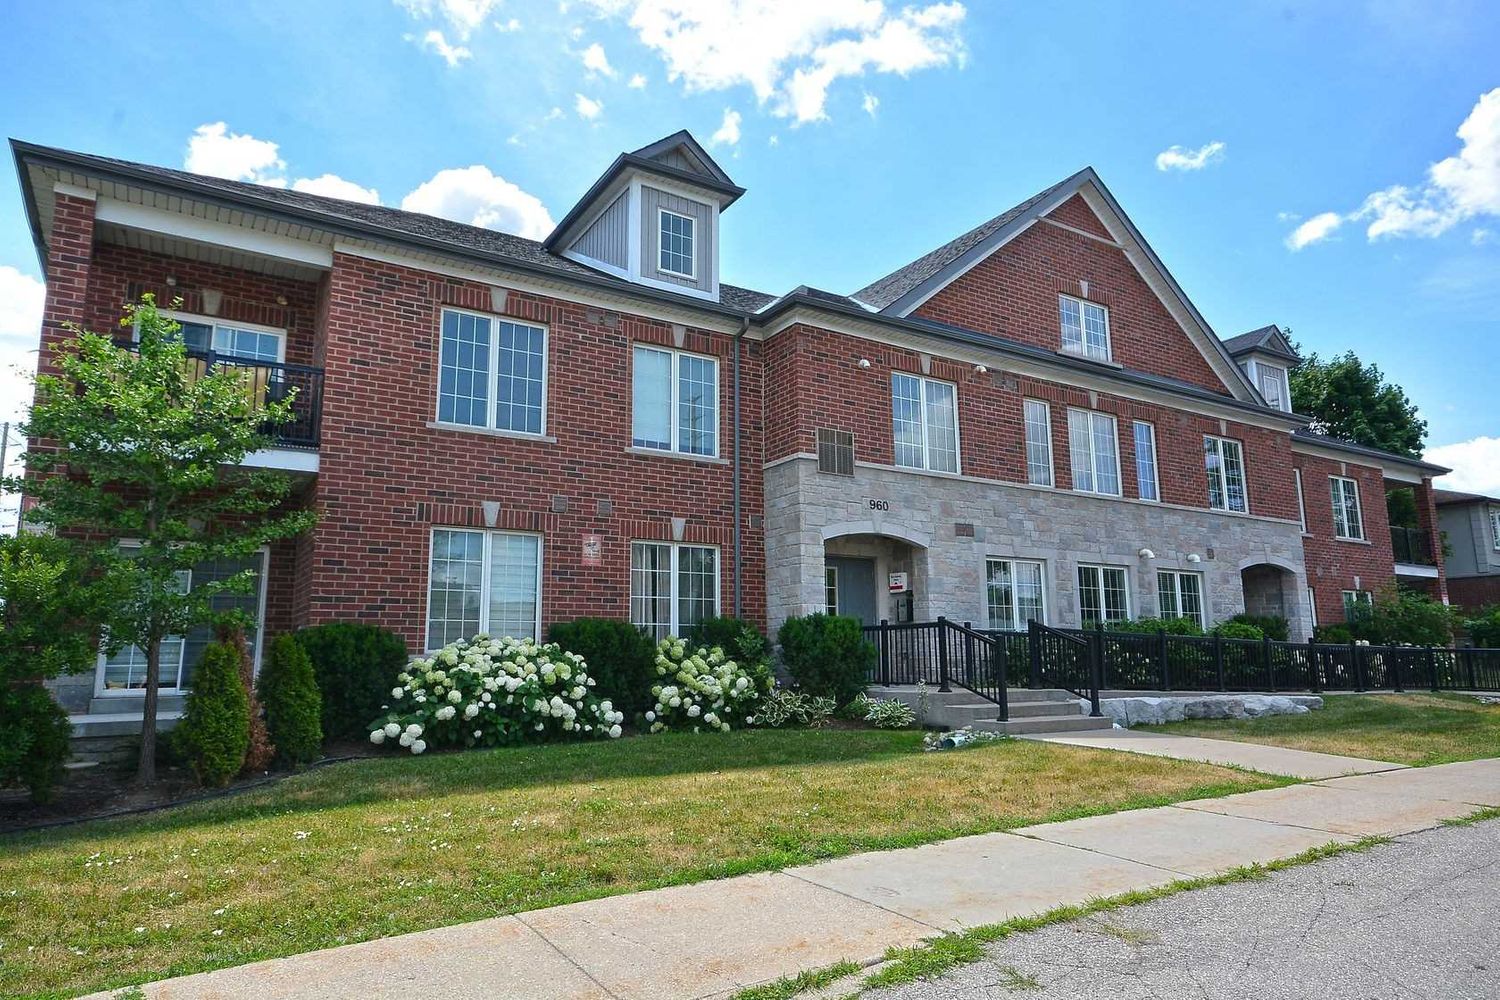 960 Bloor Street. 960 Bloor Townhomes is located in  Mississauga, Toronto - image #1 of 2